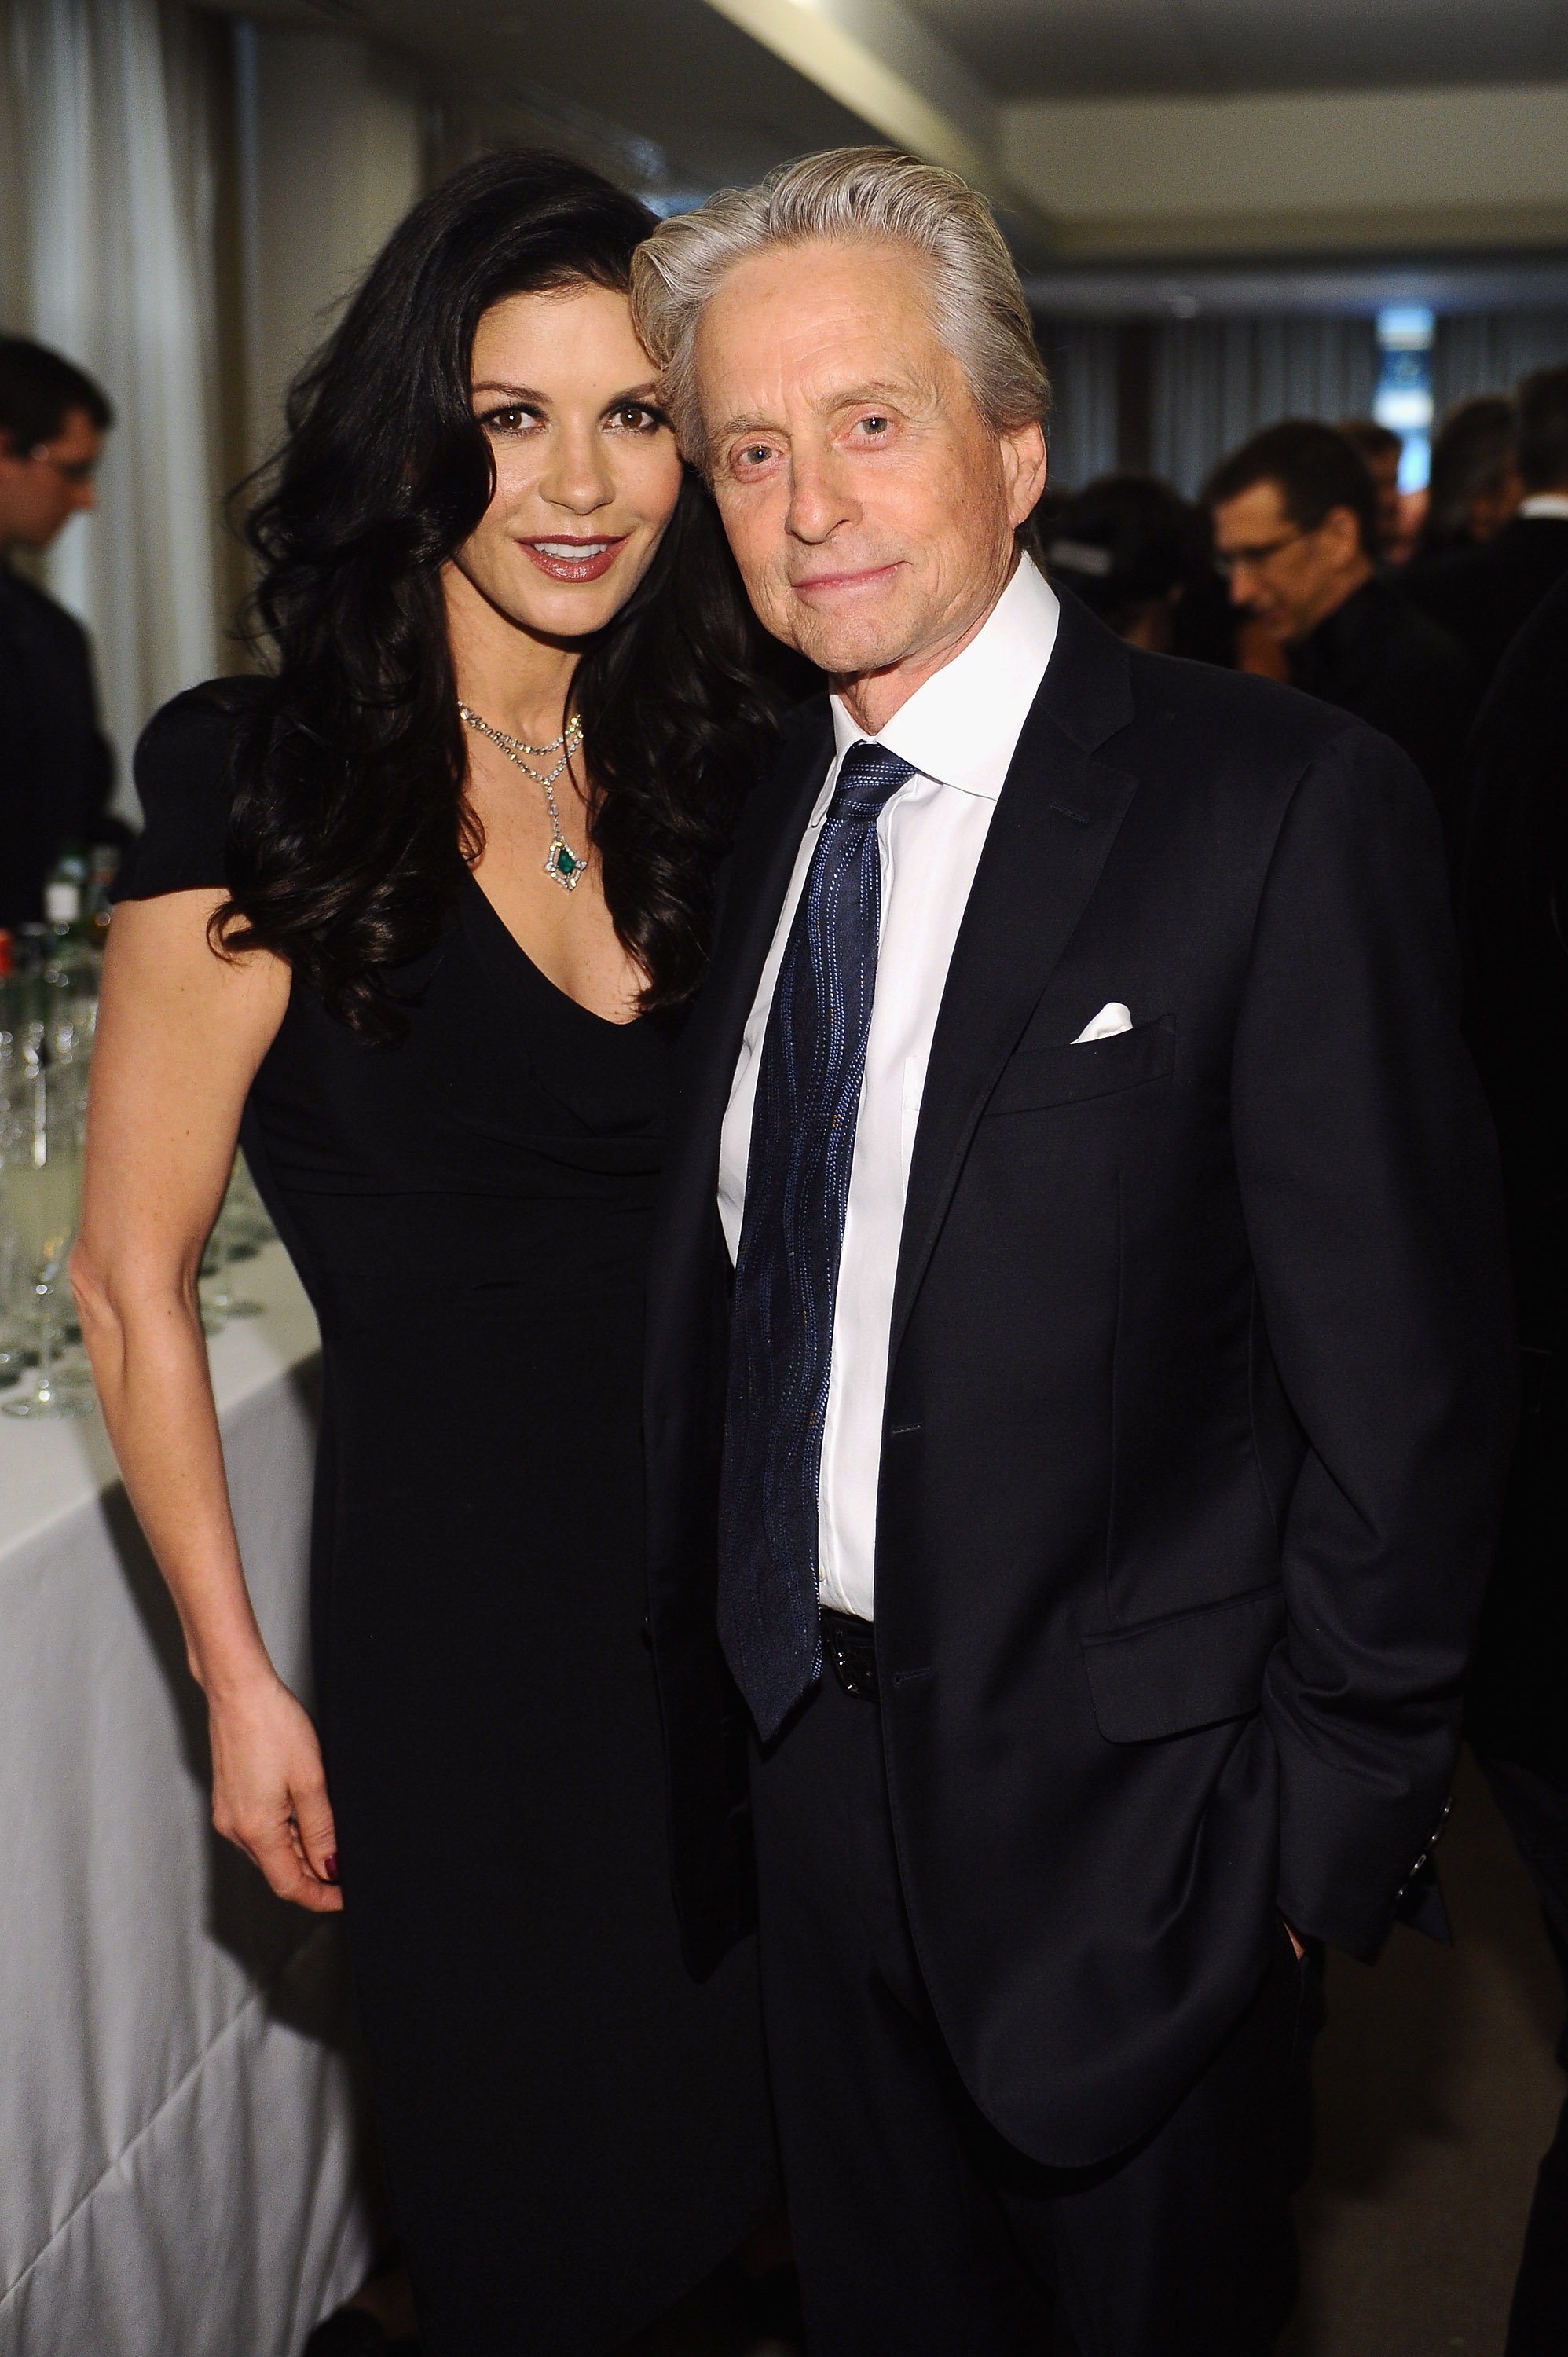 Michael Douglas and Catherine Zeta-Jones attend the reception of The Film Society of Lincoln Center's 40th Chaplin Award Gala | Source: Getty Images